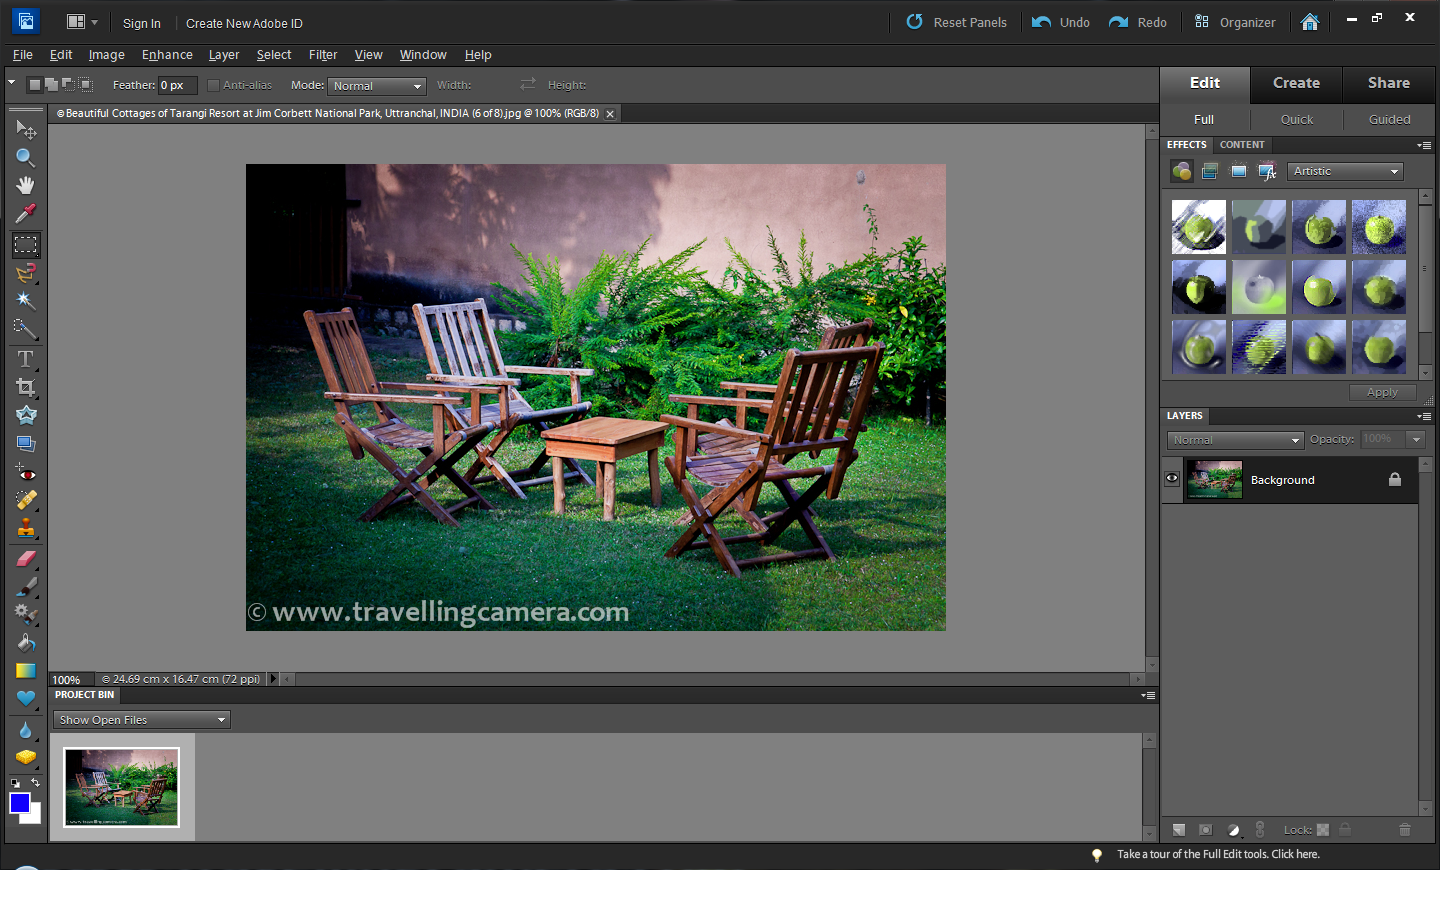 photoshop elements free trial